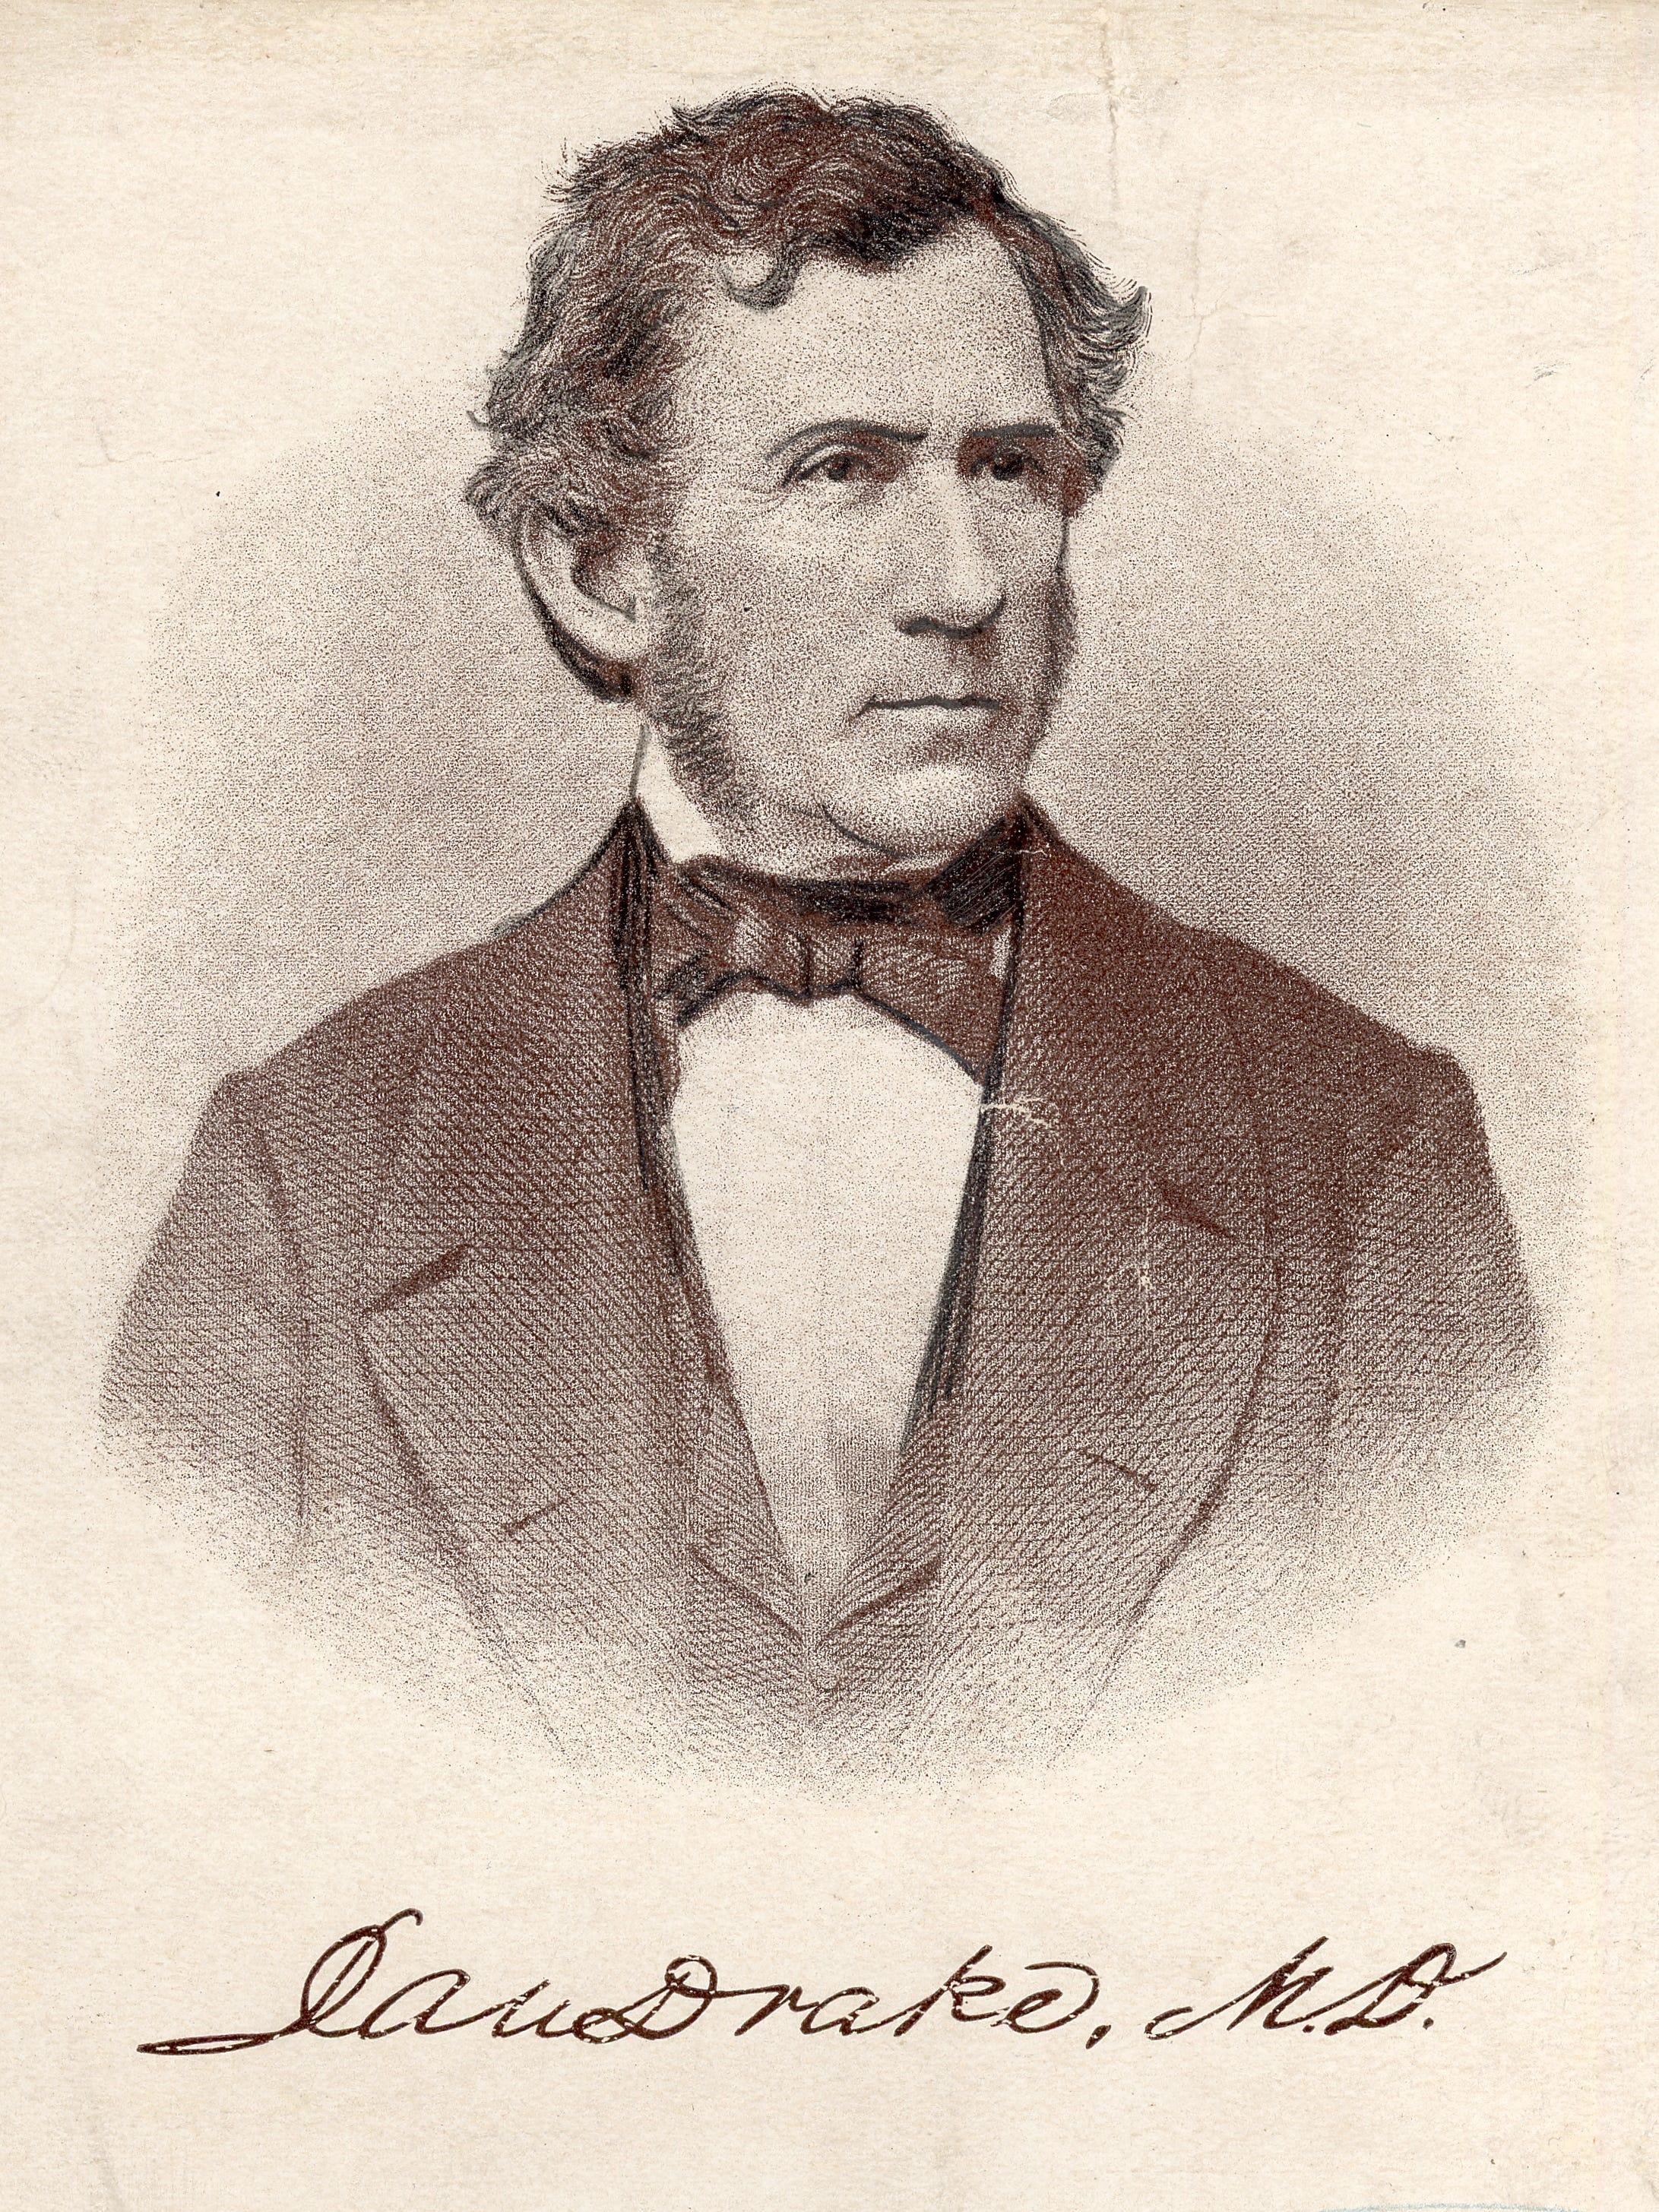 Dr. Daniel Drake was a pioneering physician as well as historian and writer in Cincinnati